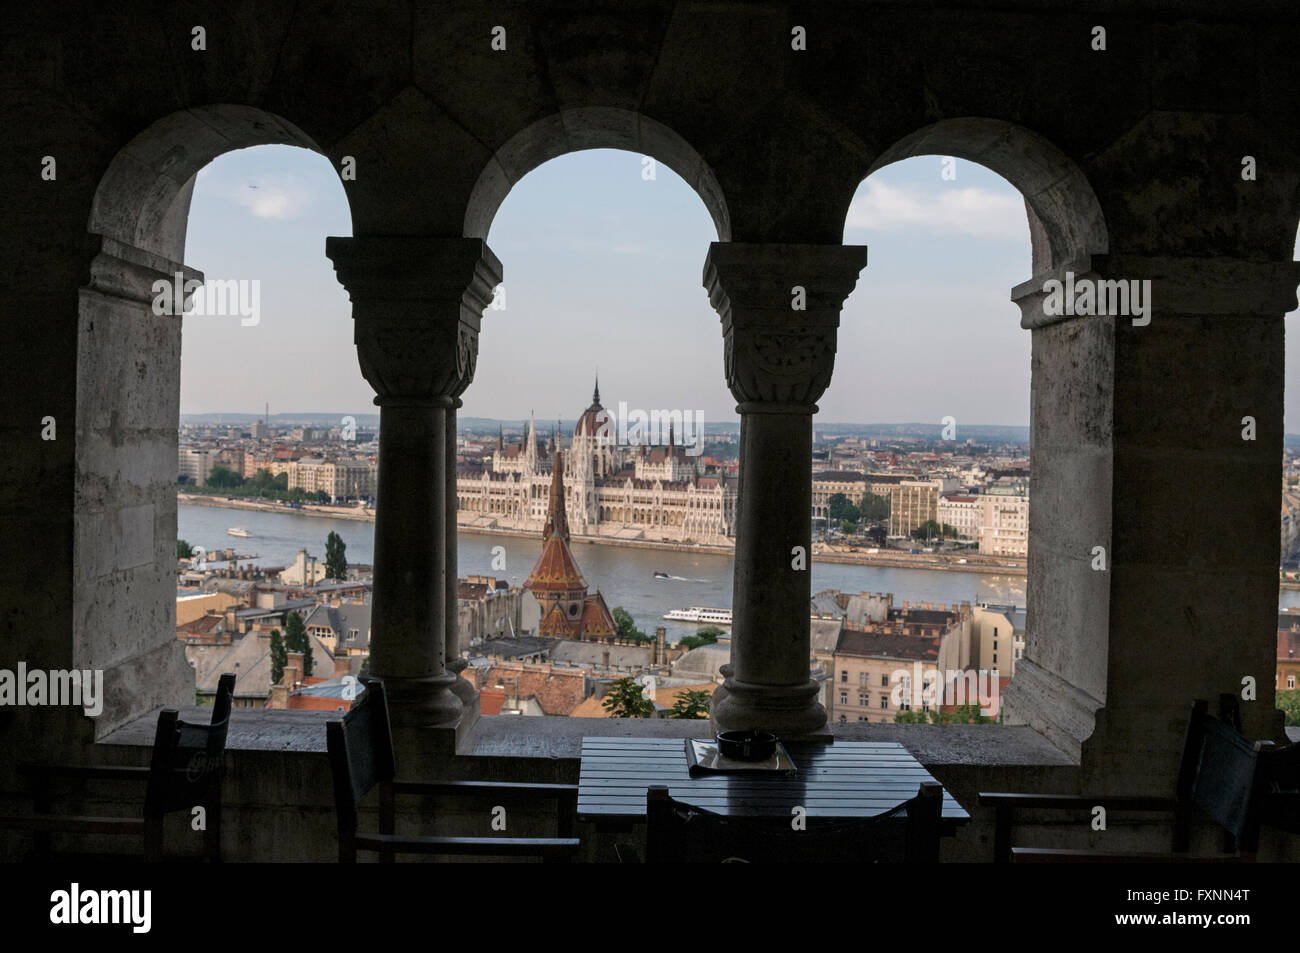 View of the Hungarian Parliament across the River Danube from a restaurant in the Fishermen's Bastion at Buda Castle hill in Bud Stock Photo